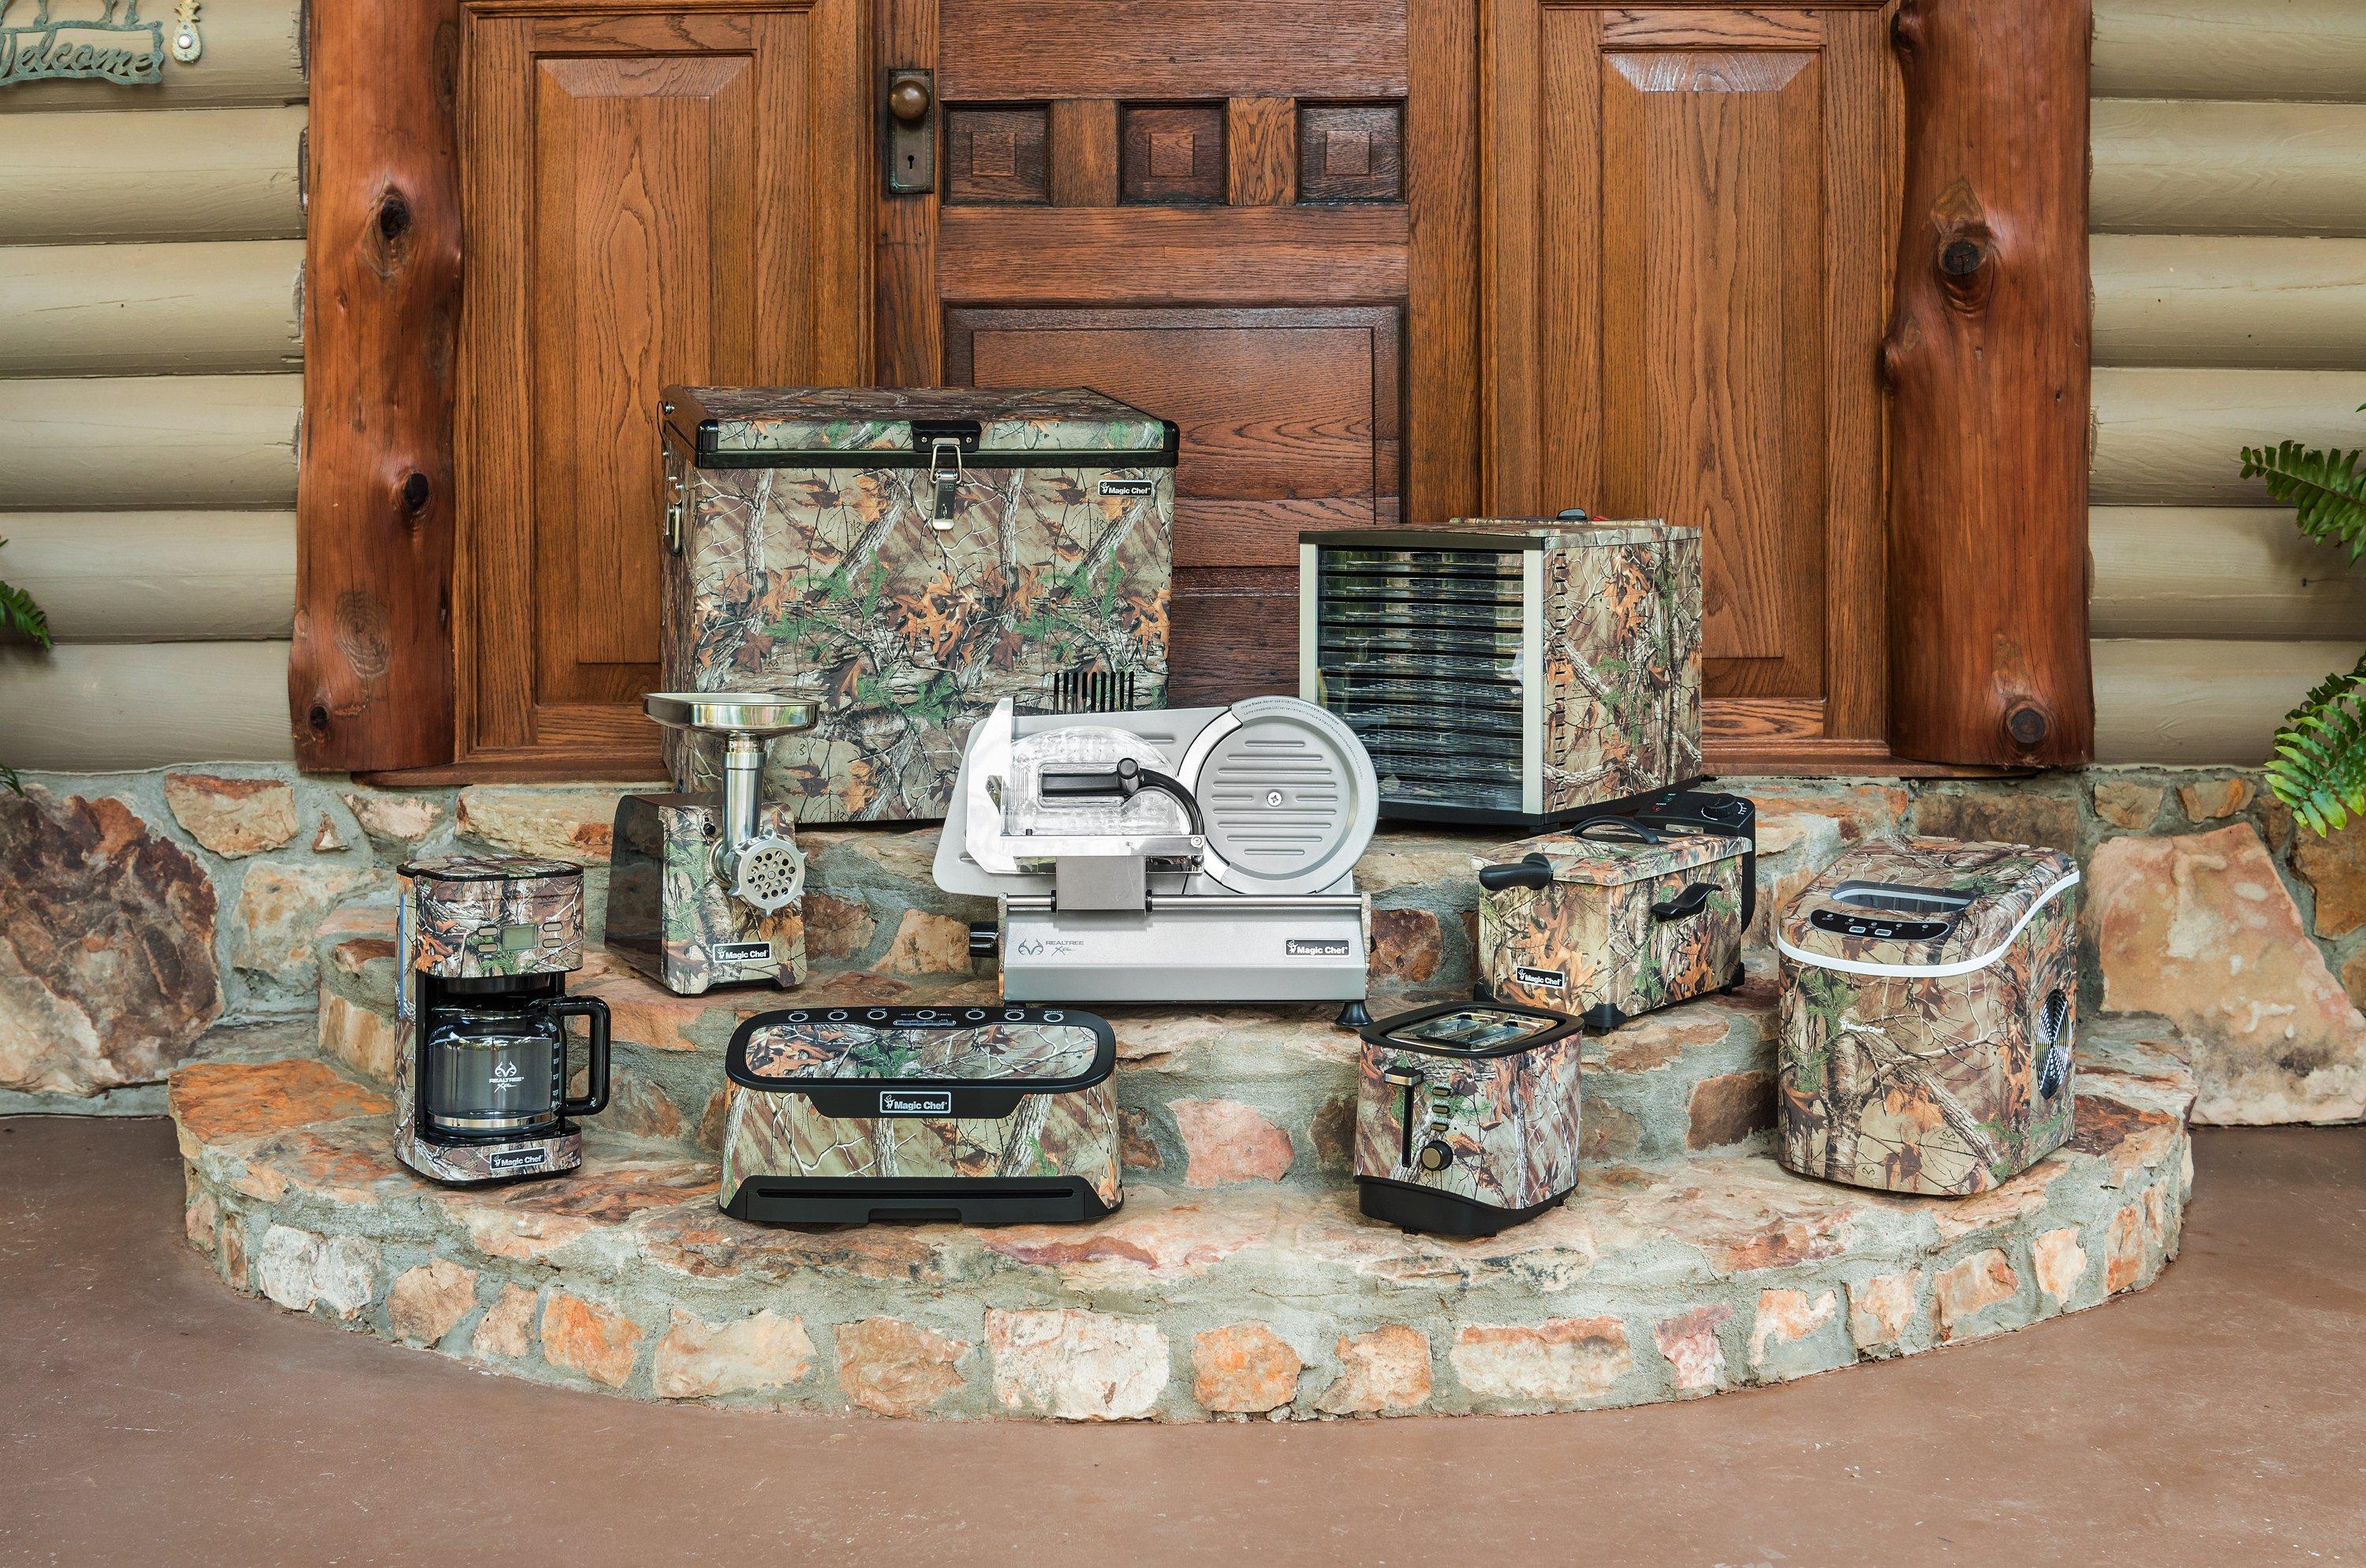 The Realtree Line from Magic Chef brings quality kitchen appliances decked out Realtree Xtra to your camp or kitchen.